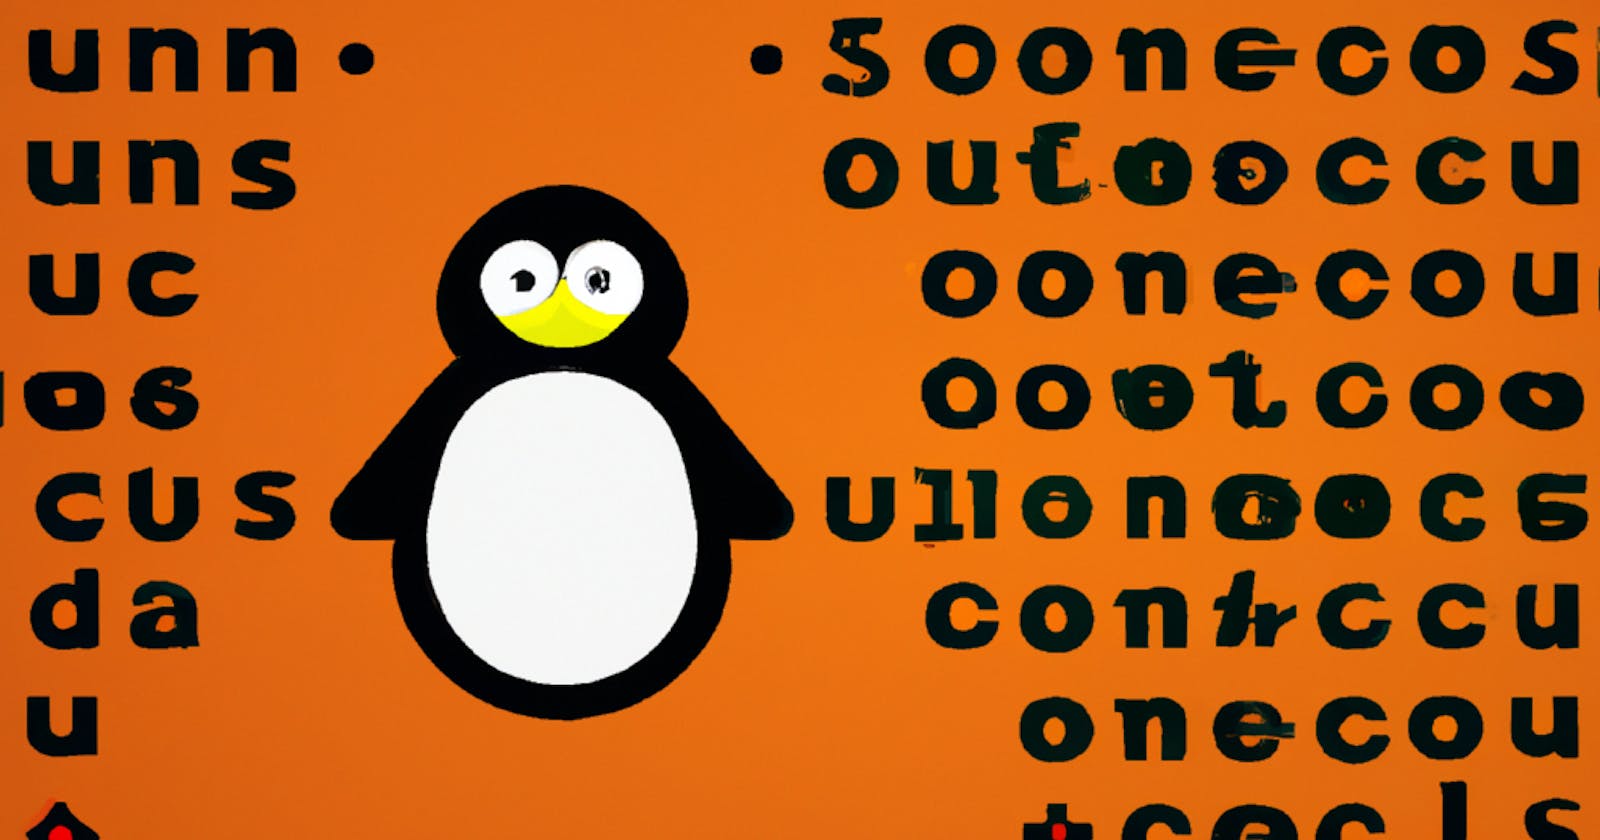 25+ Linux Commands Every Developer Should 
Know-1: